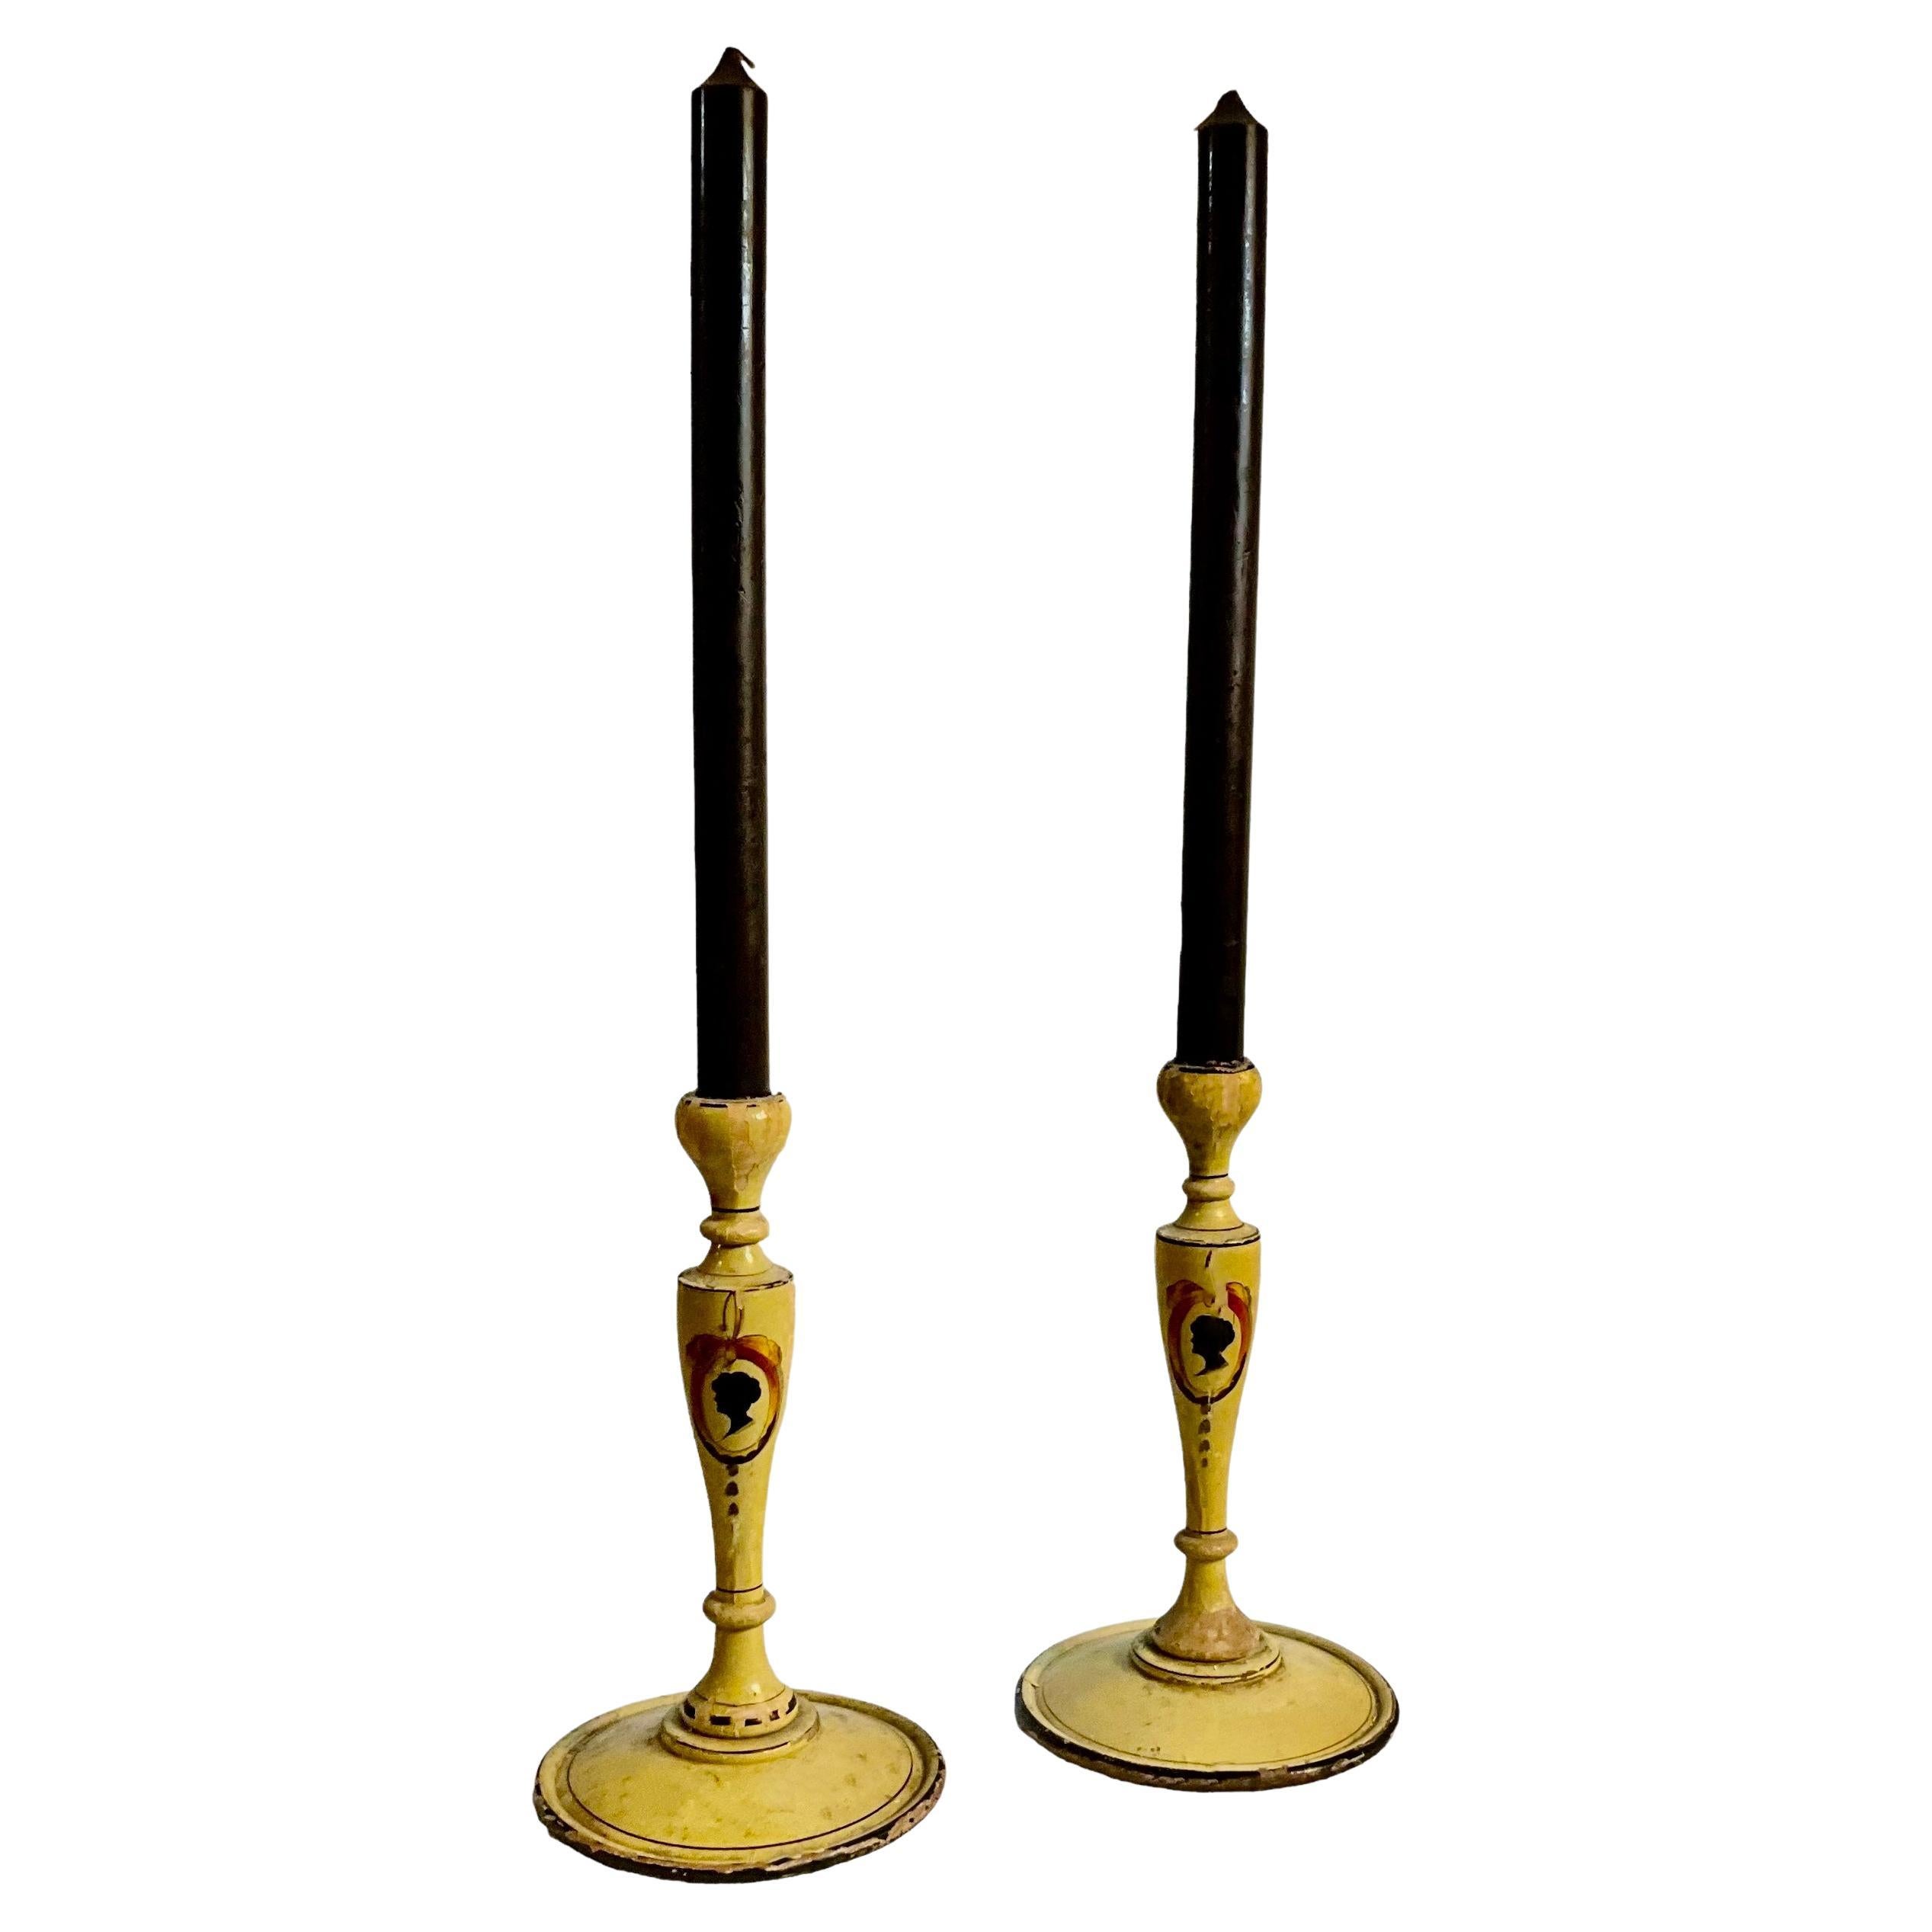 19th-C. French Carved Wood Tole Candlesticks W/ Silhouettes & Mustard Paint -2 For Sale